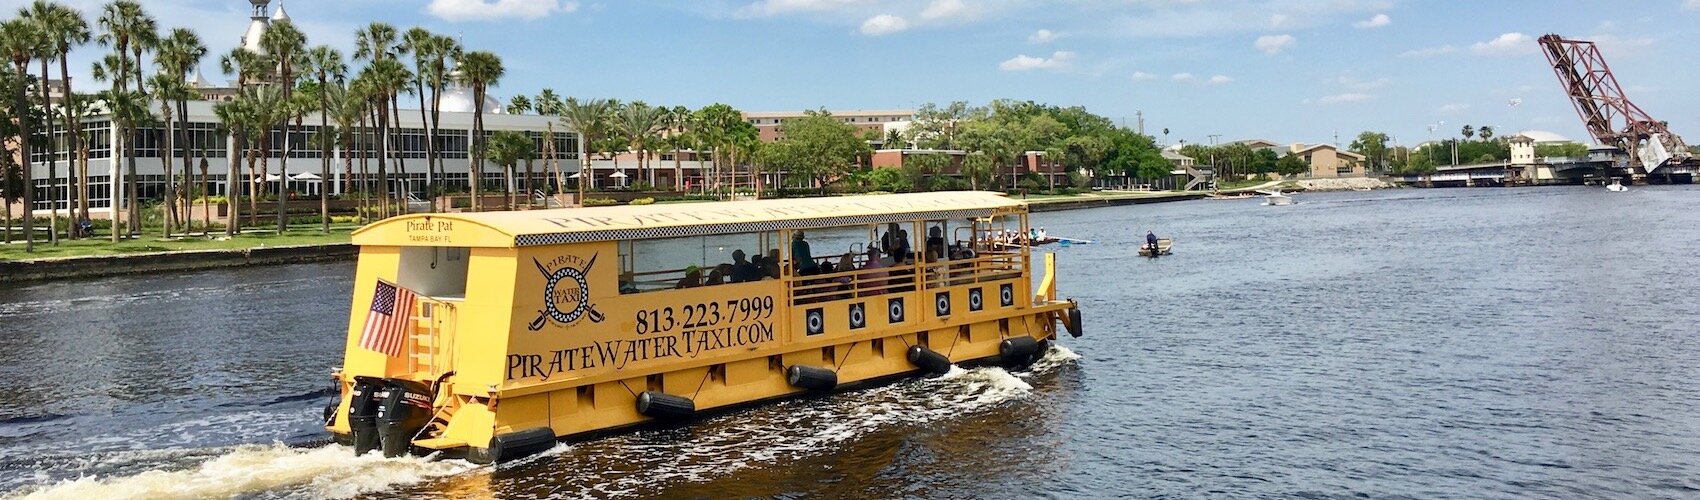 Pirate Taxi makes 15 stops along Tampa Riverwalk in the Channel District, Harbour Island, and Davis Islands.